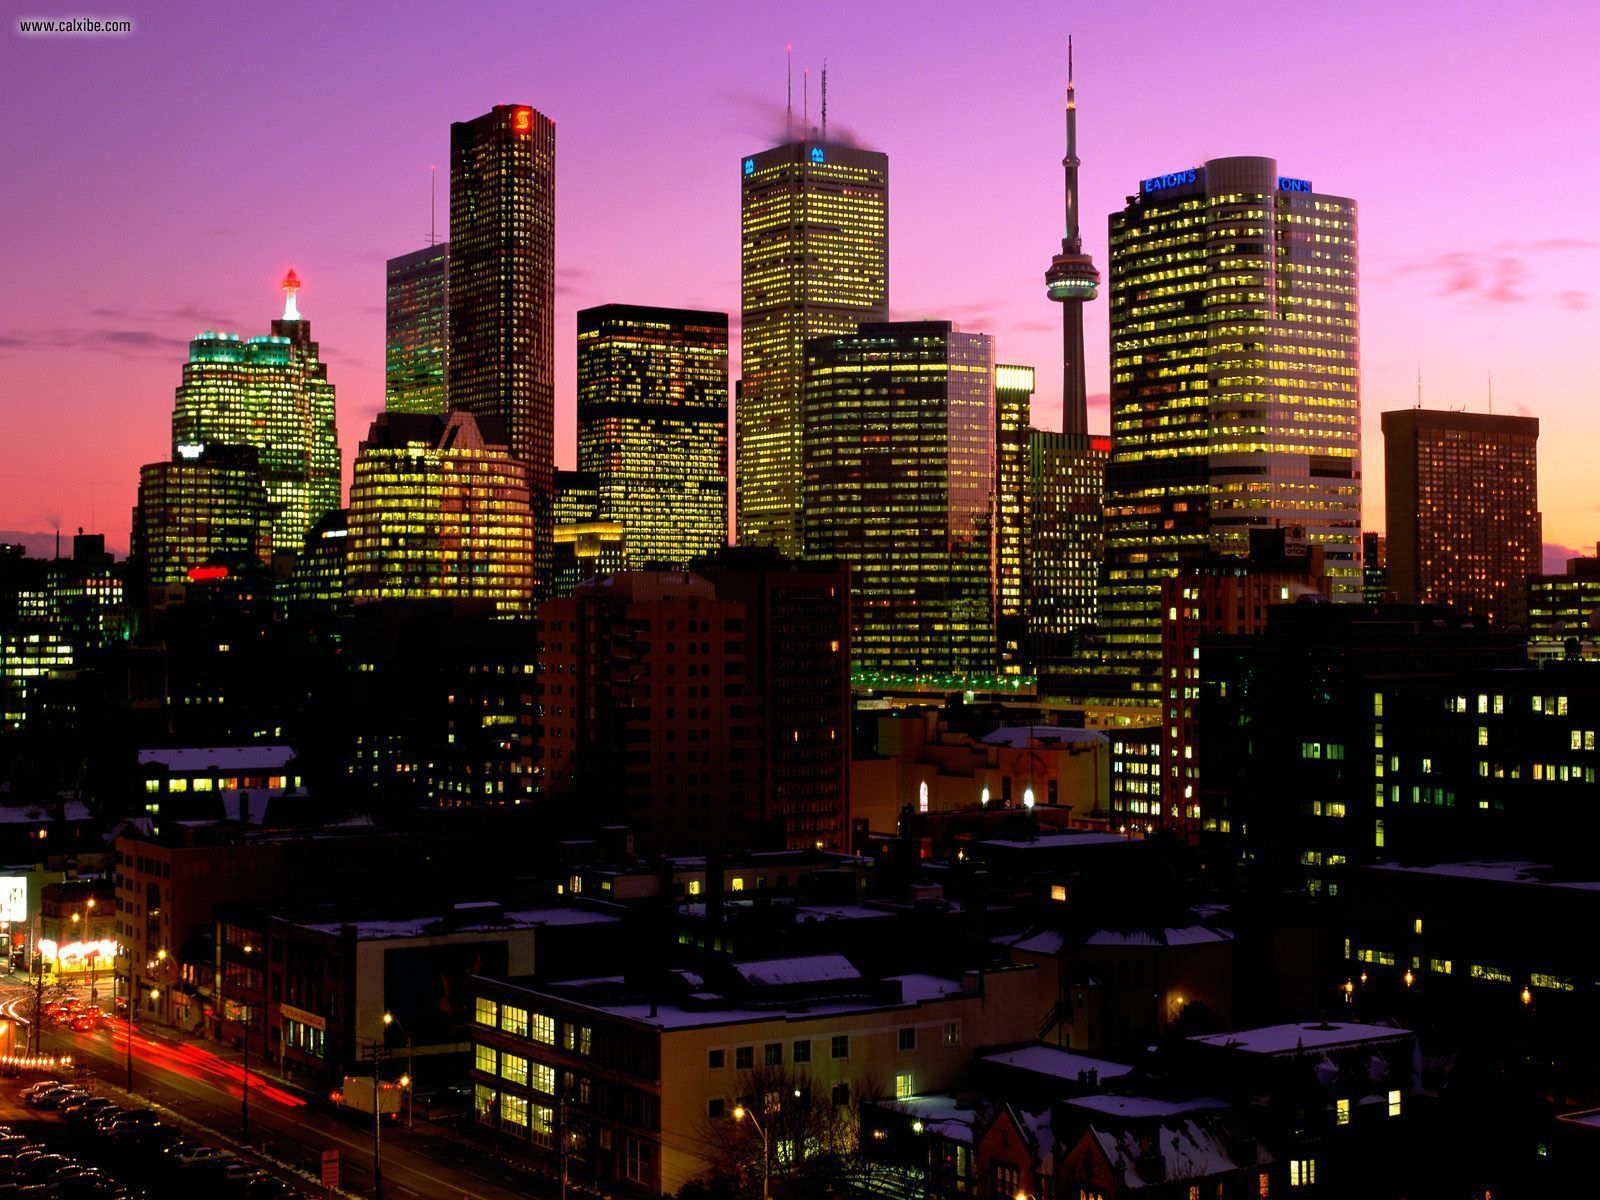 Buildings City Toronto At Dusk Ontario Canada Picture Nr